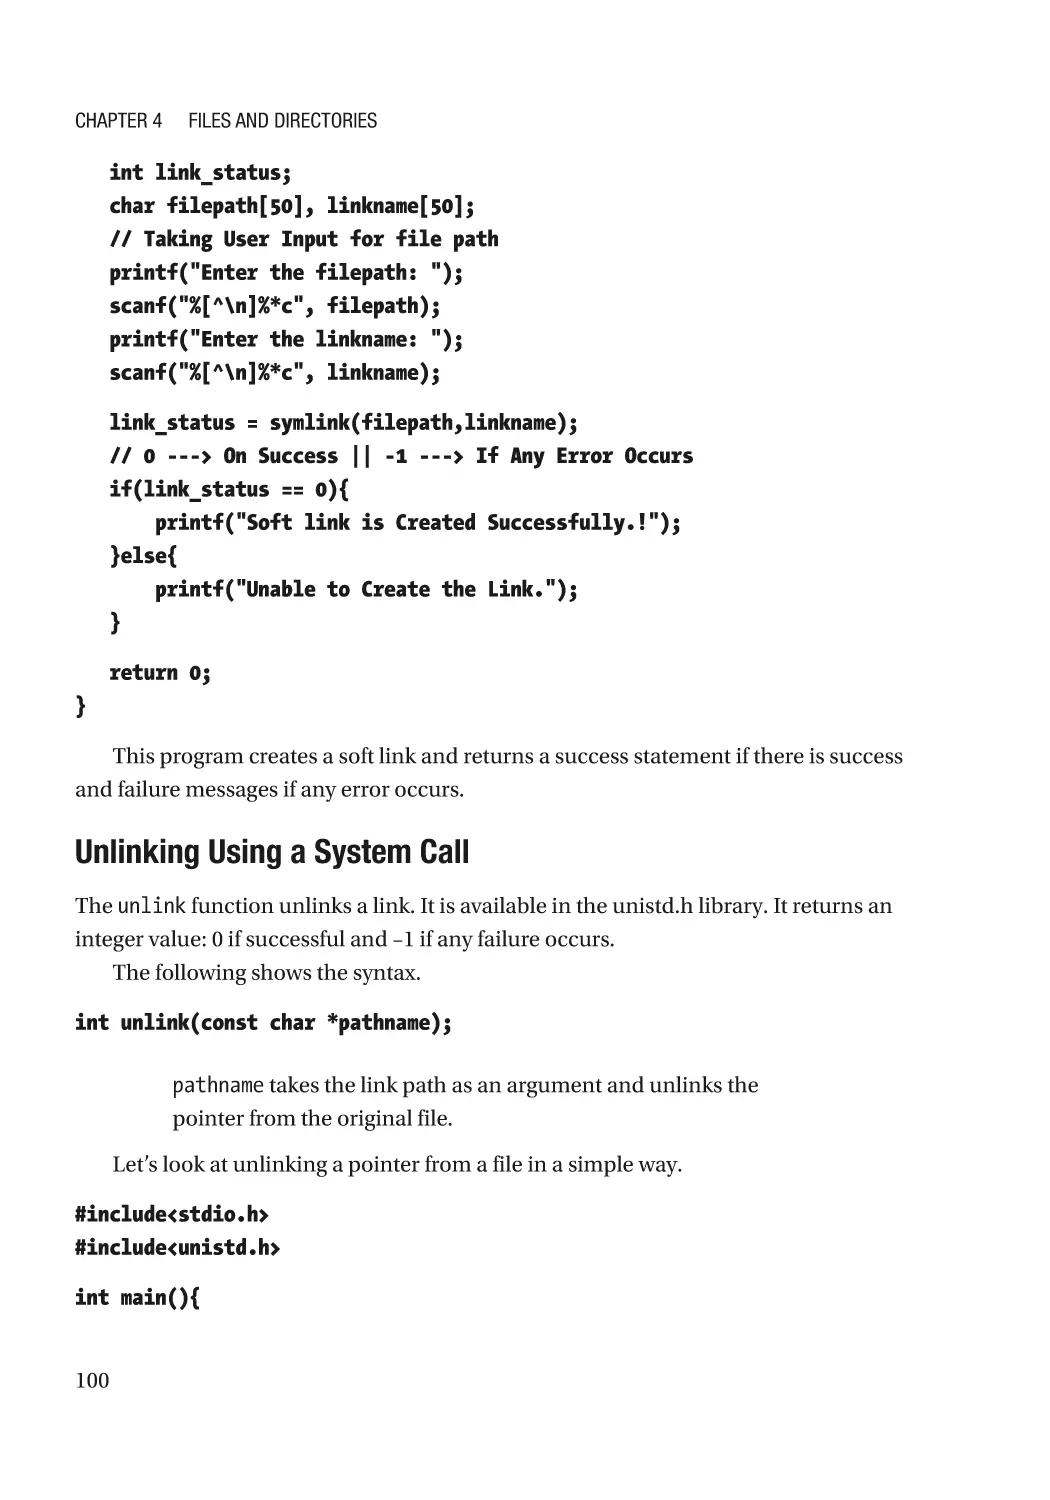 Unlinking Using a System Call